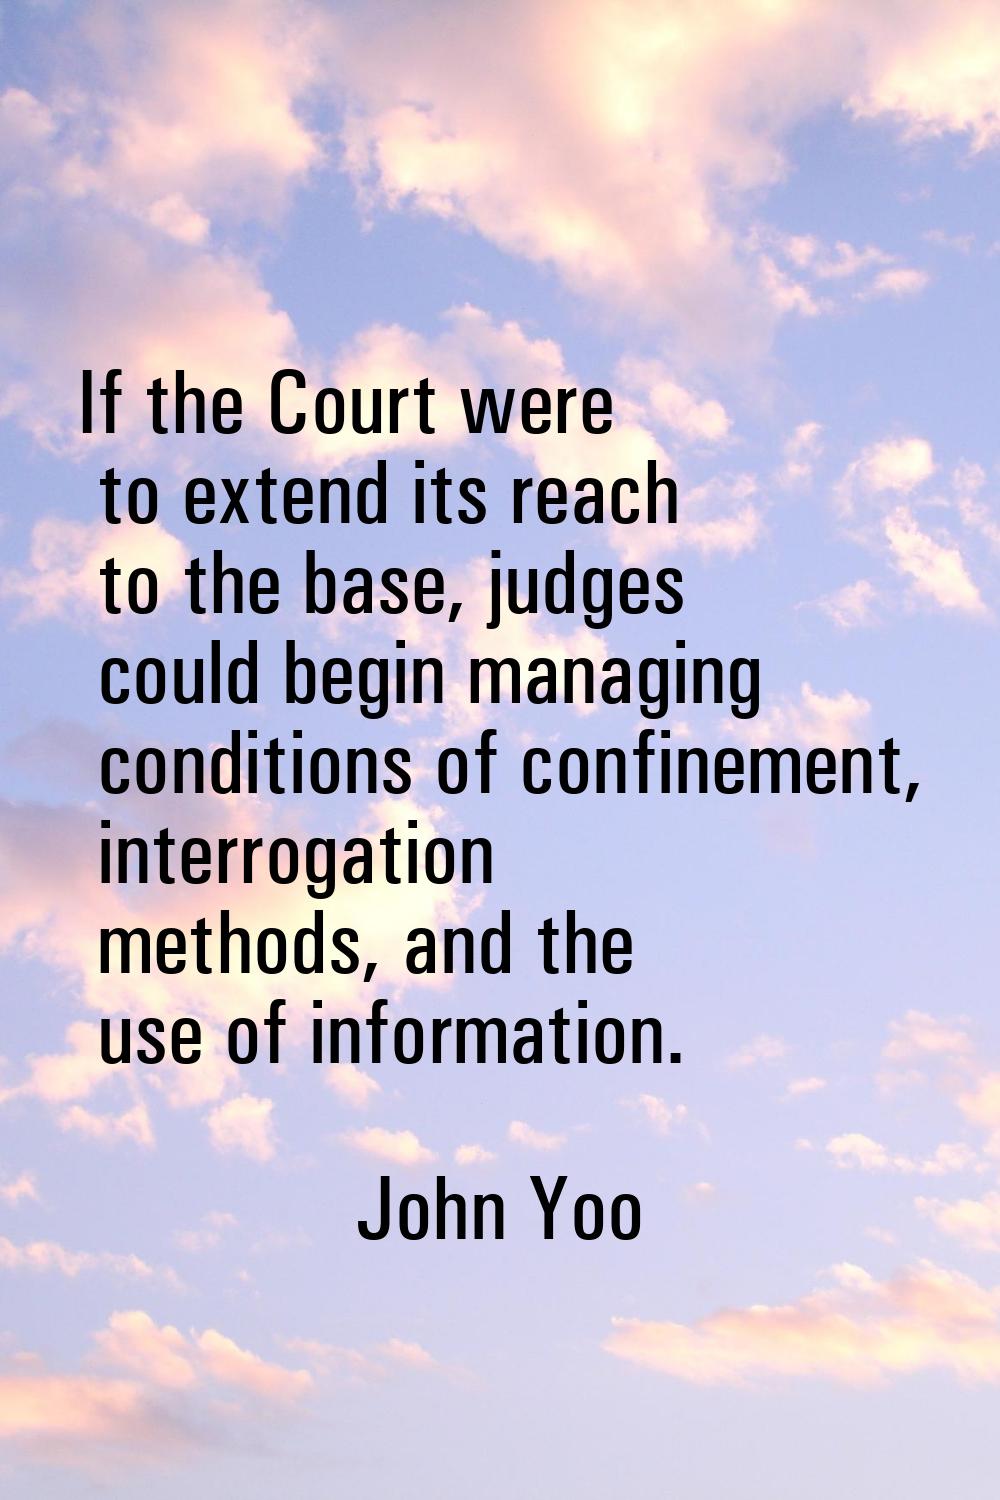 If the Court were to extend its reach to the base, judges could begin managing conditions of confin